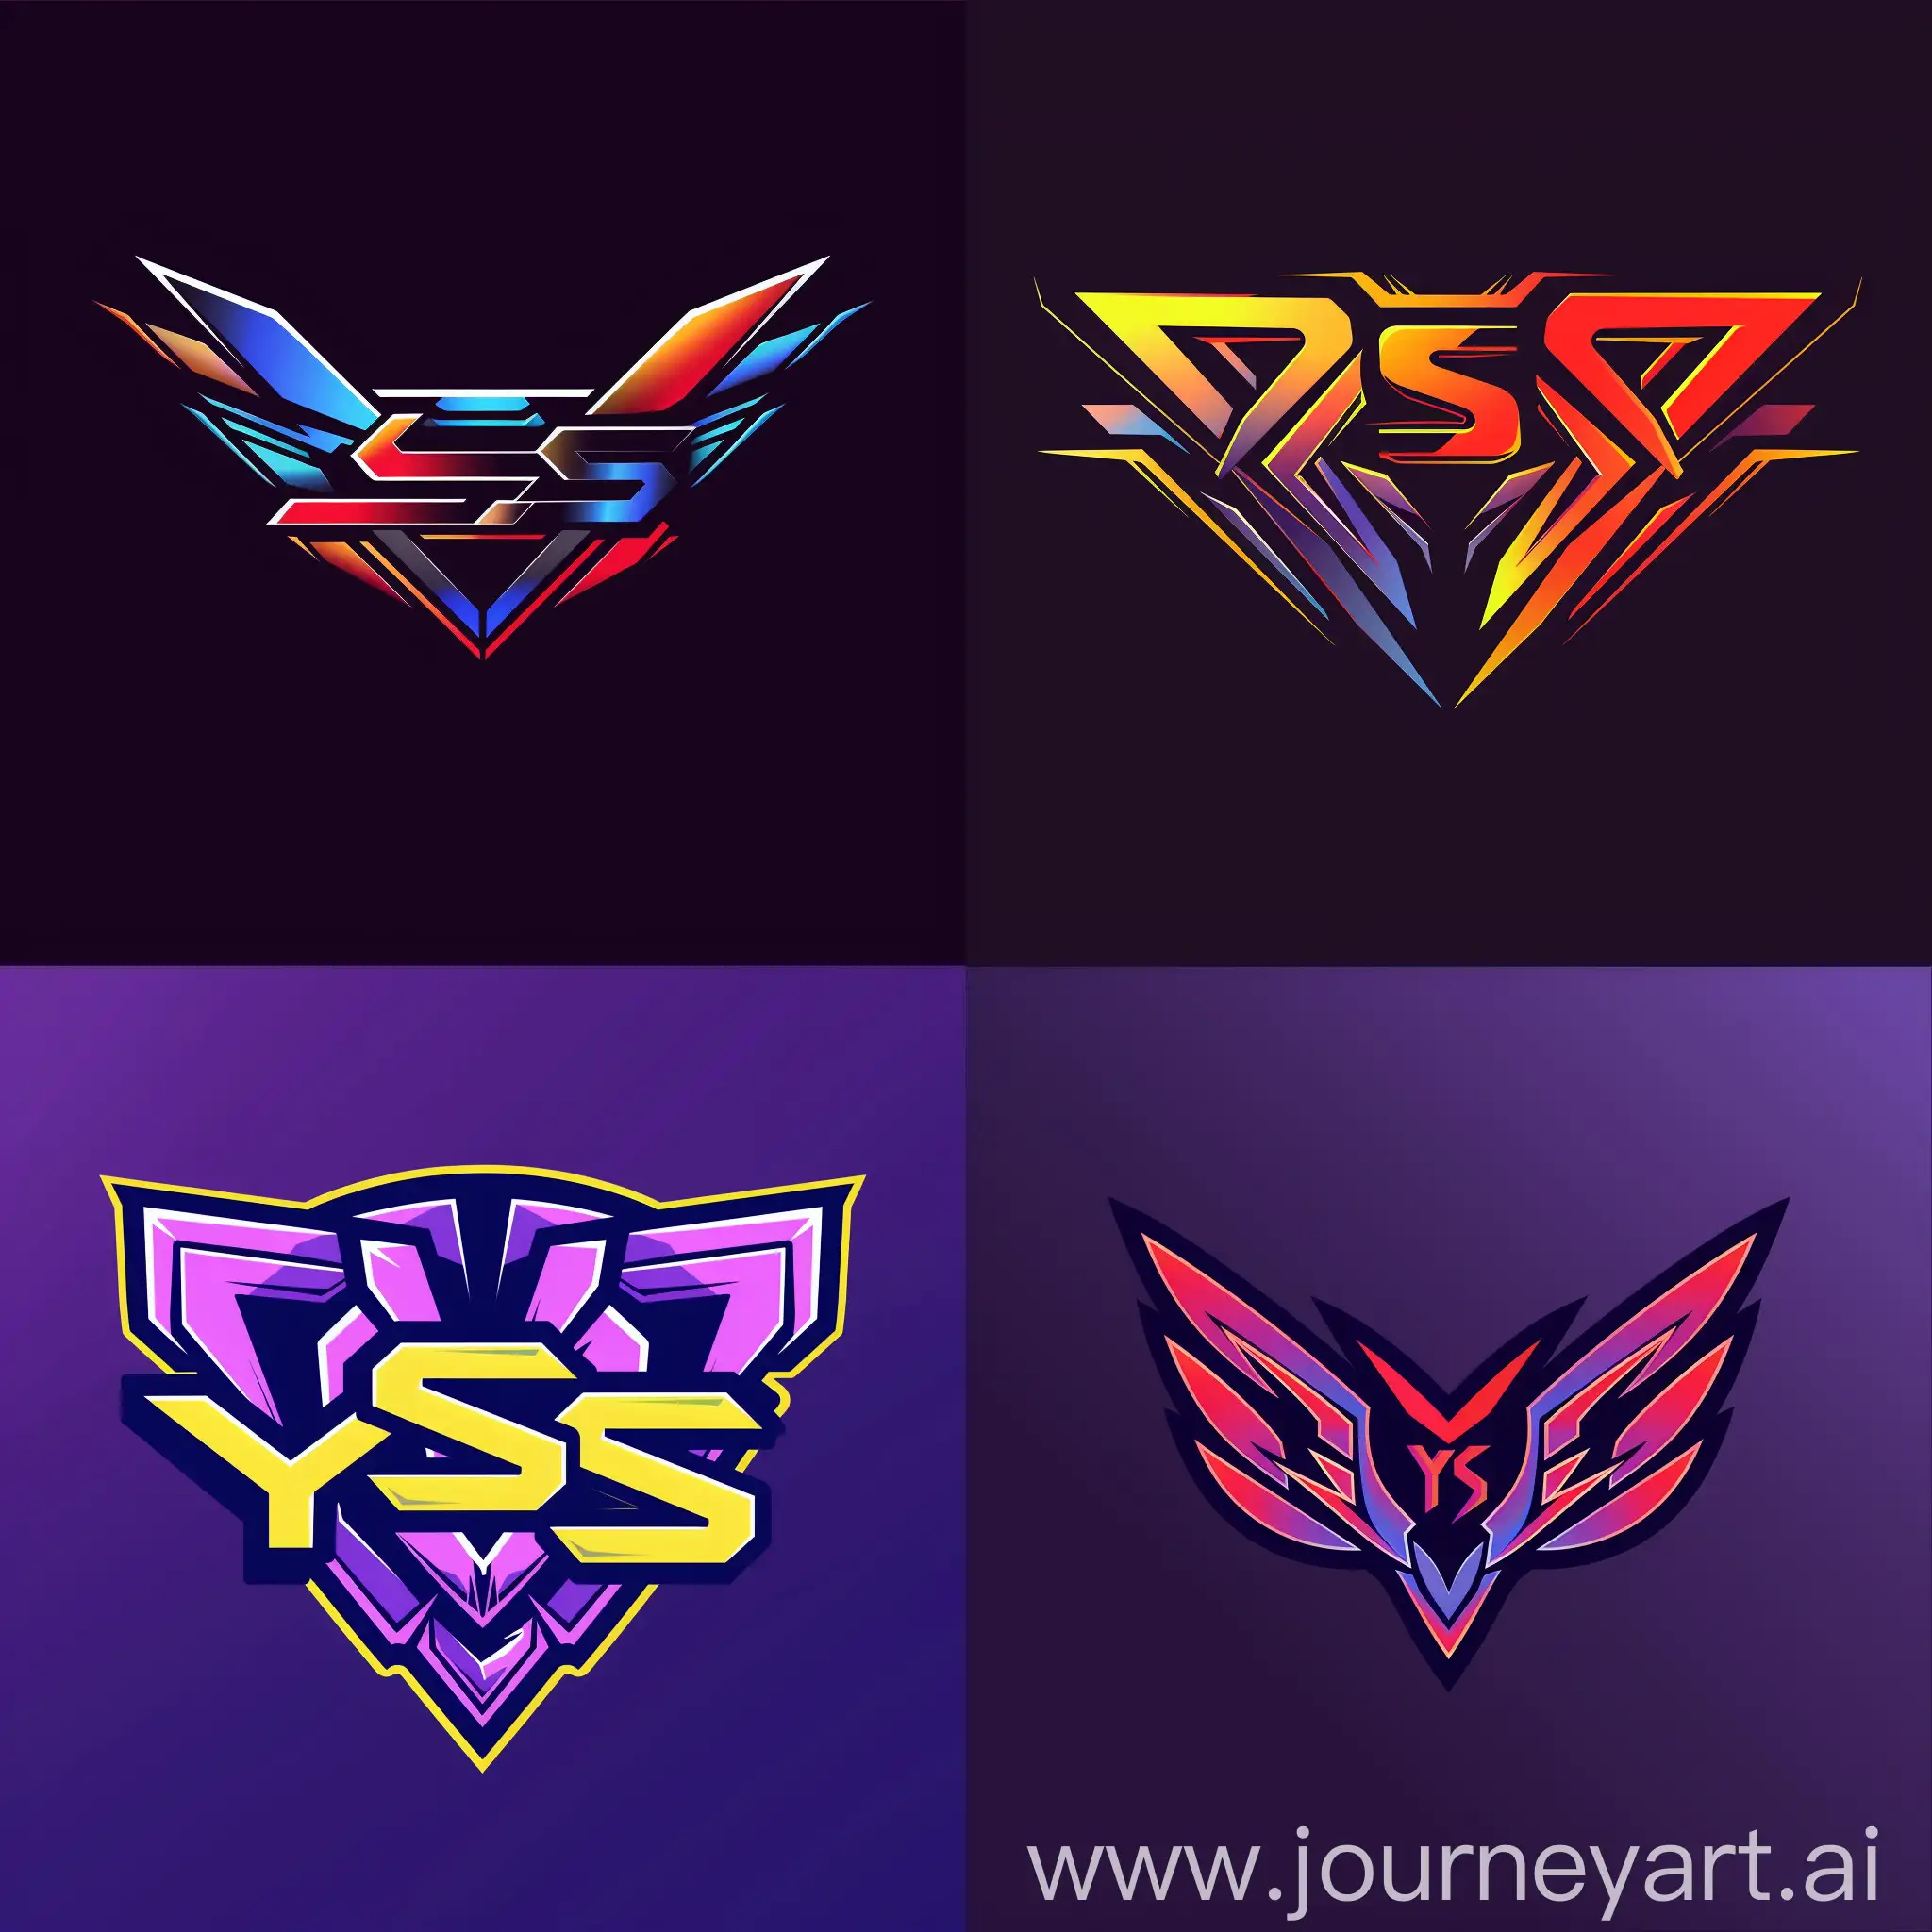 Creative-YSS-Gaming-Logo-with-Unique-Style